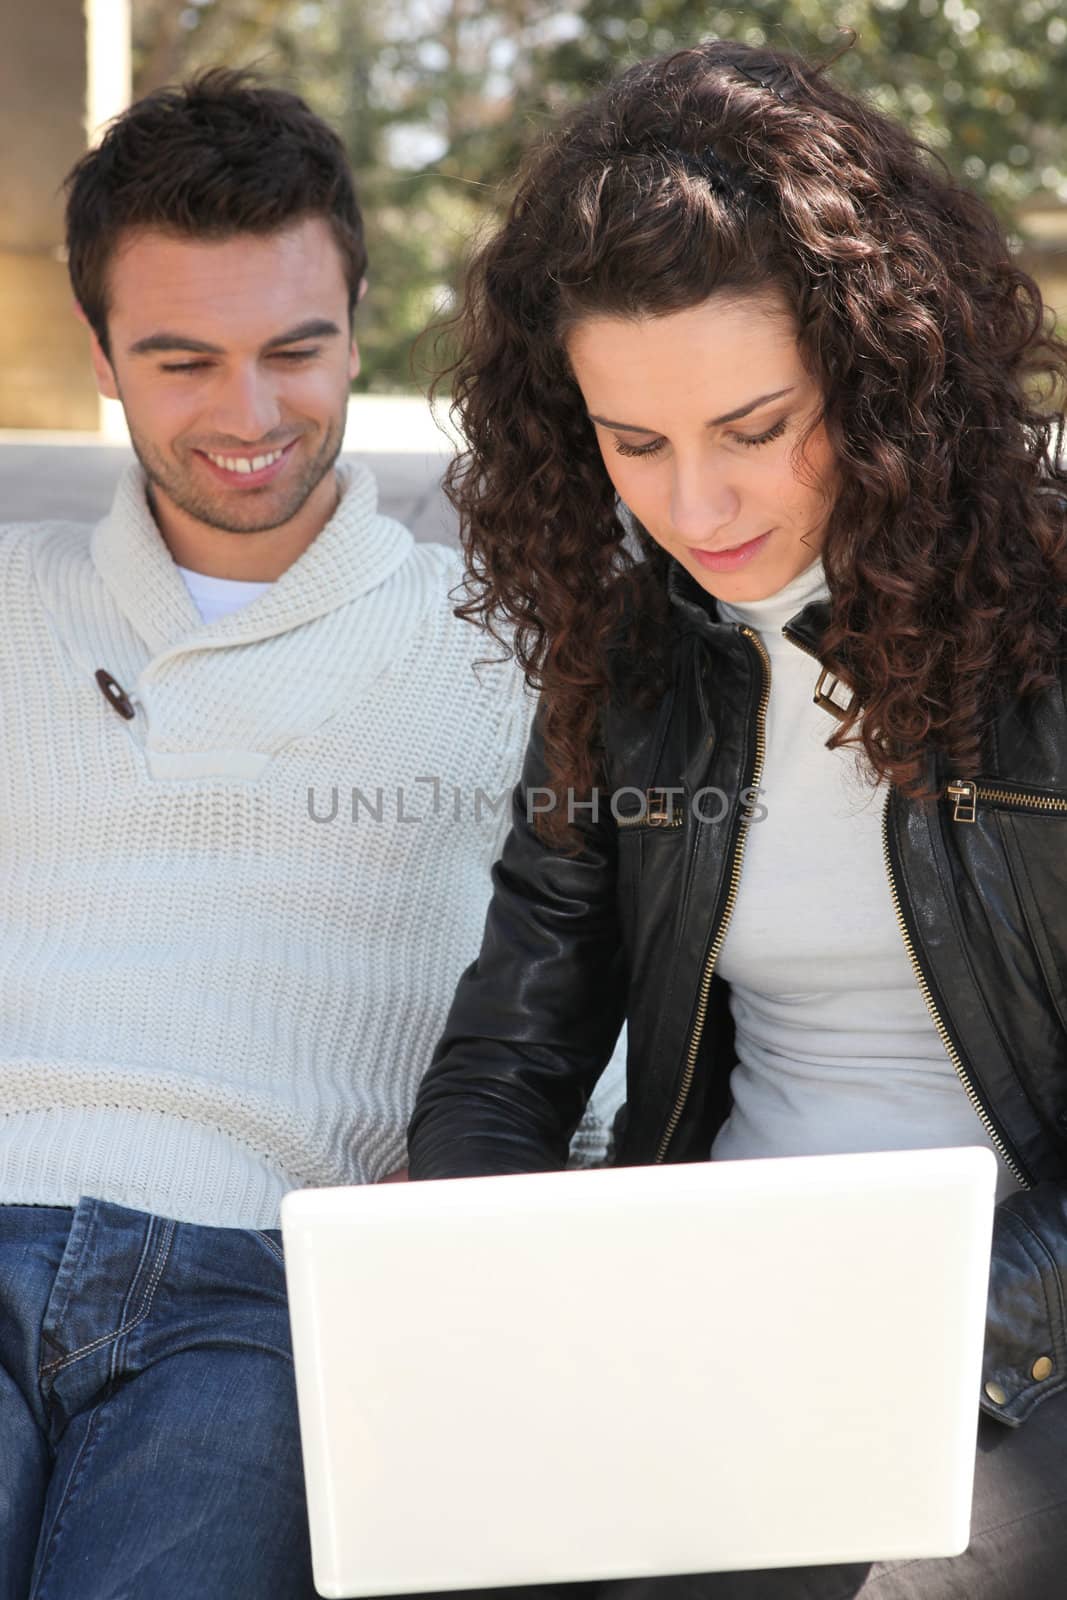 Couple using a laptop outdoors